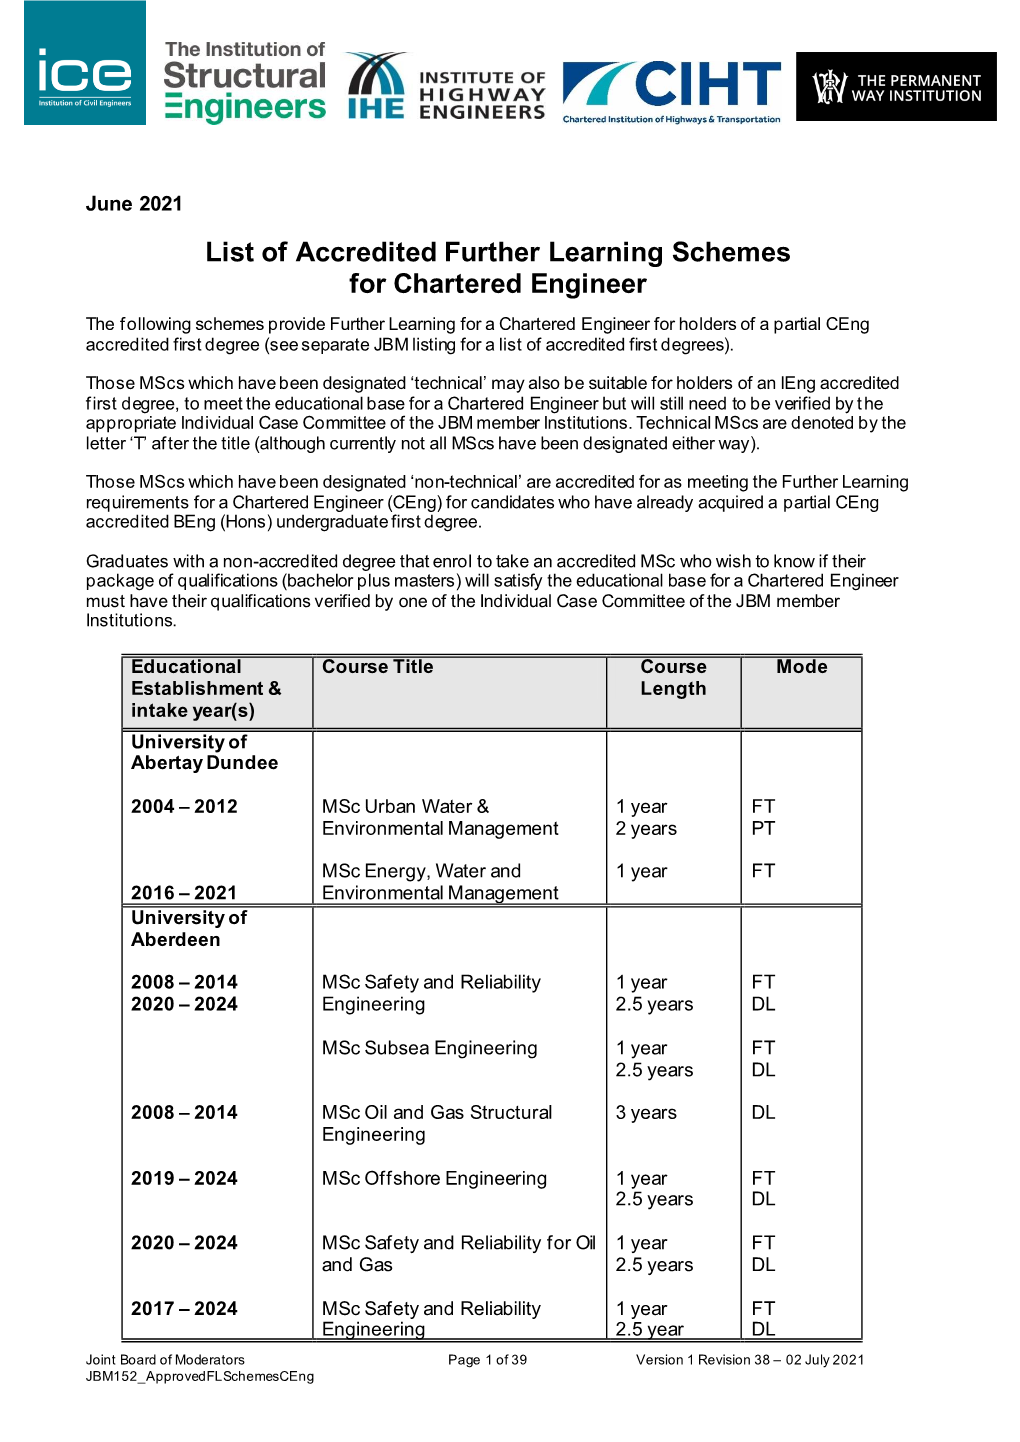 List of Accredited Further Learning Schemes for Chartered Engineer